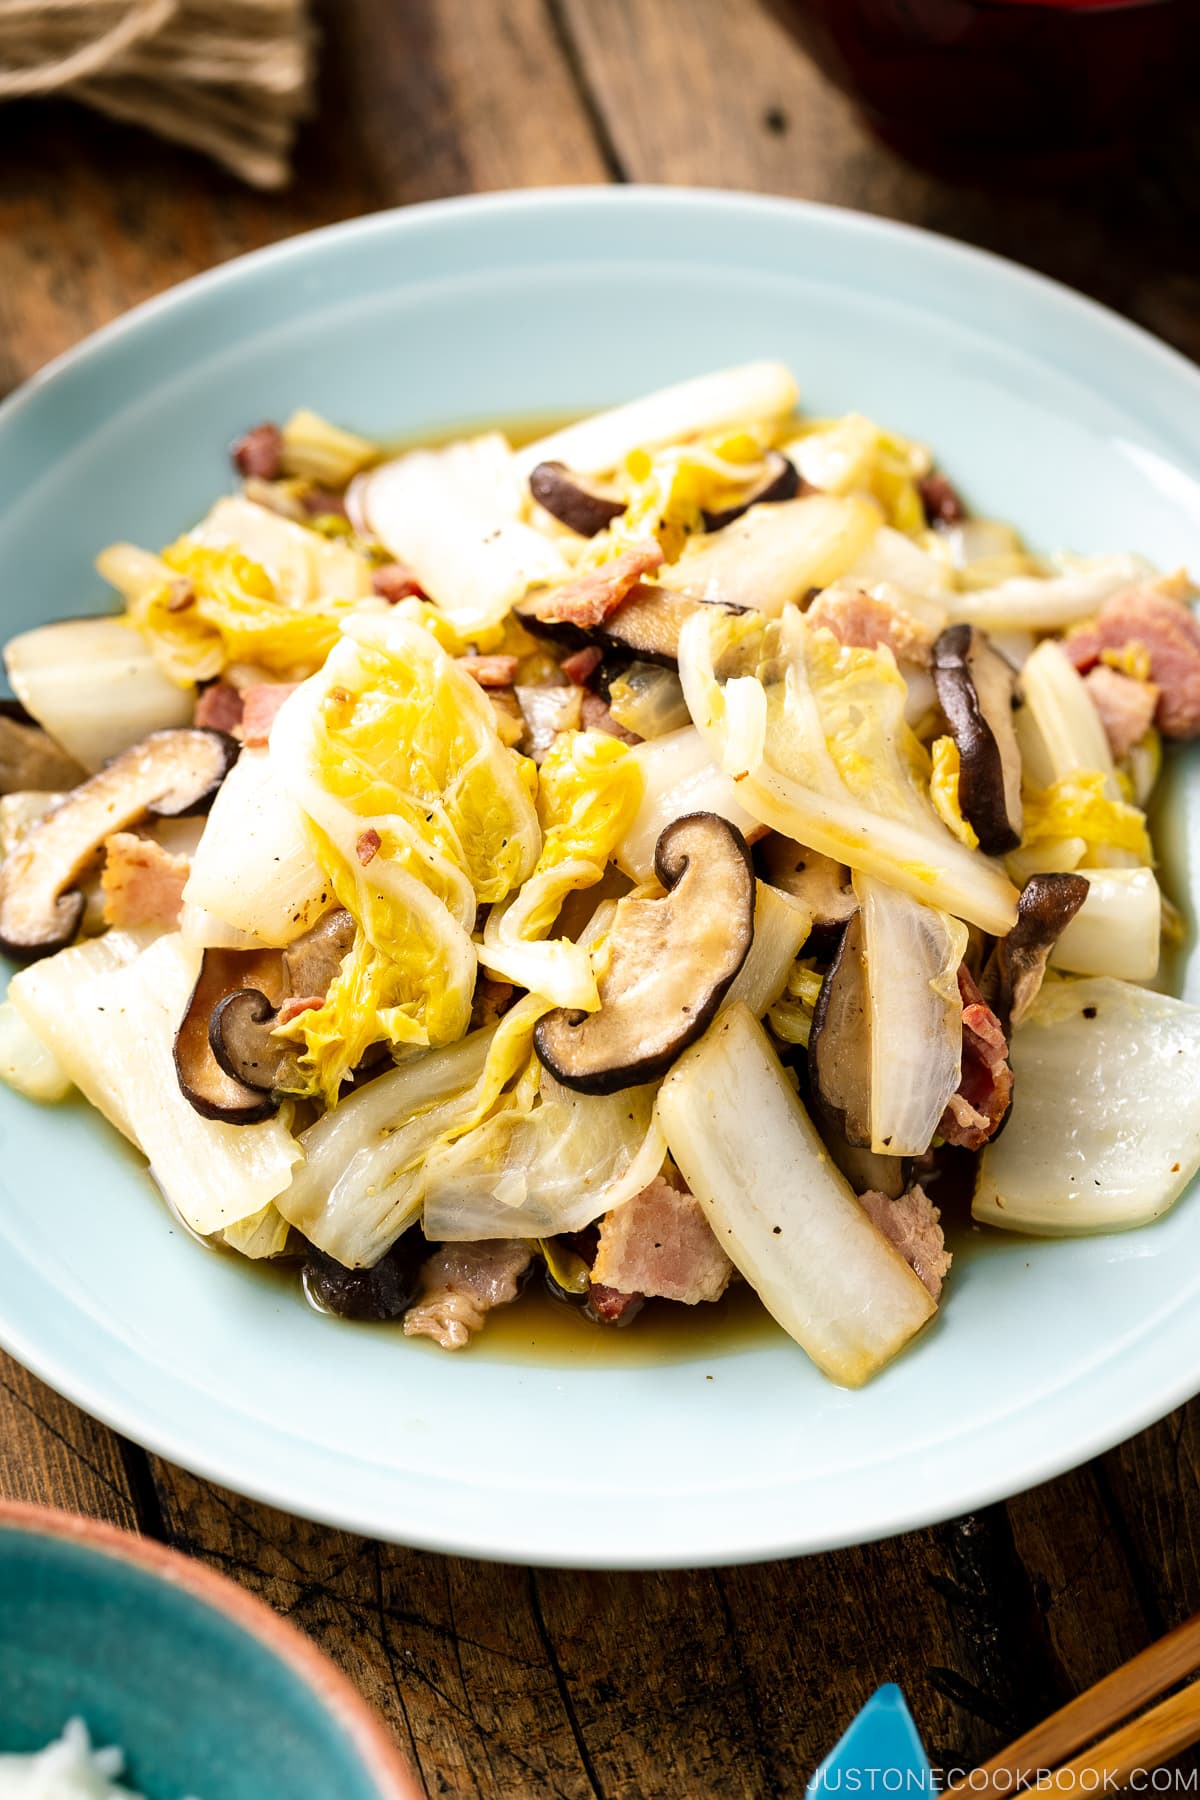 A round ceramic plate containing napa cabbage stir-fry with shiitake mushrooms and bacon seasoned lightly with soy sauce.